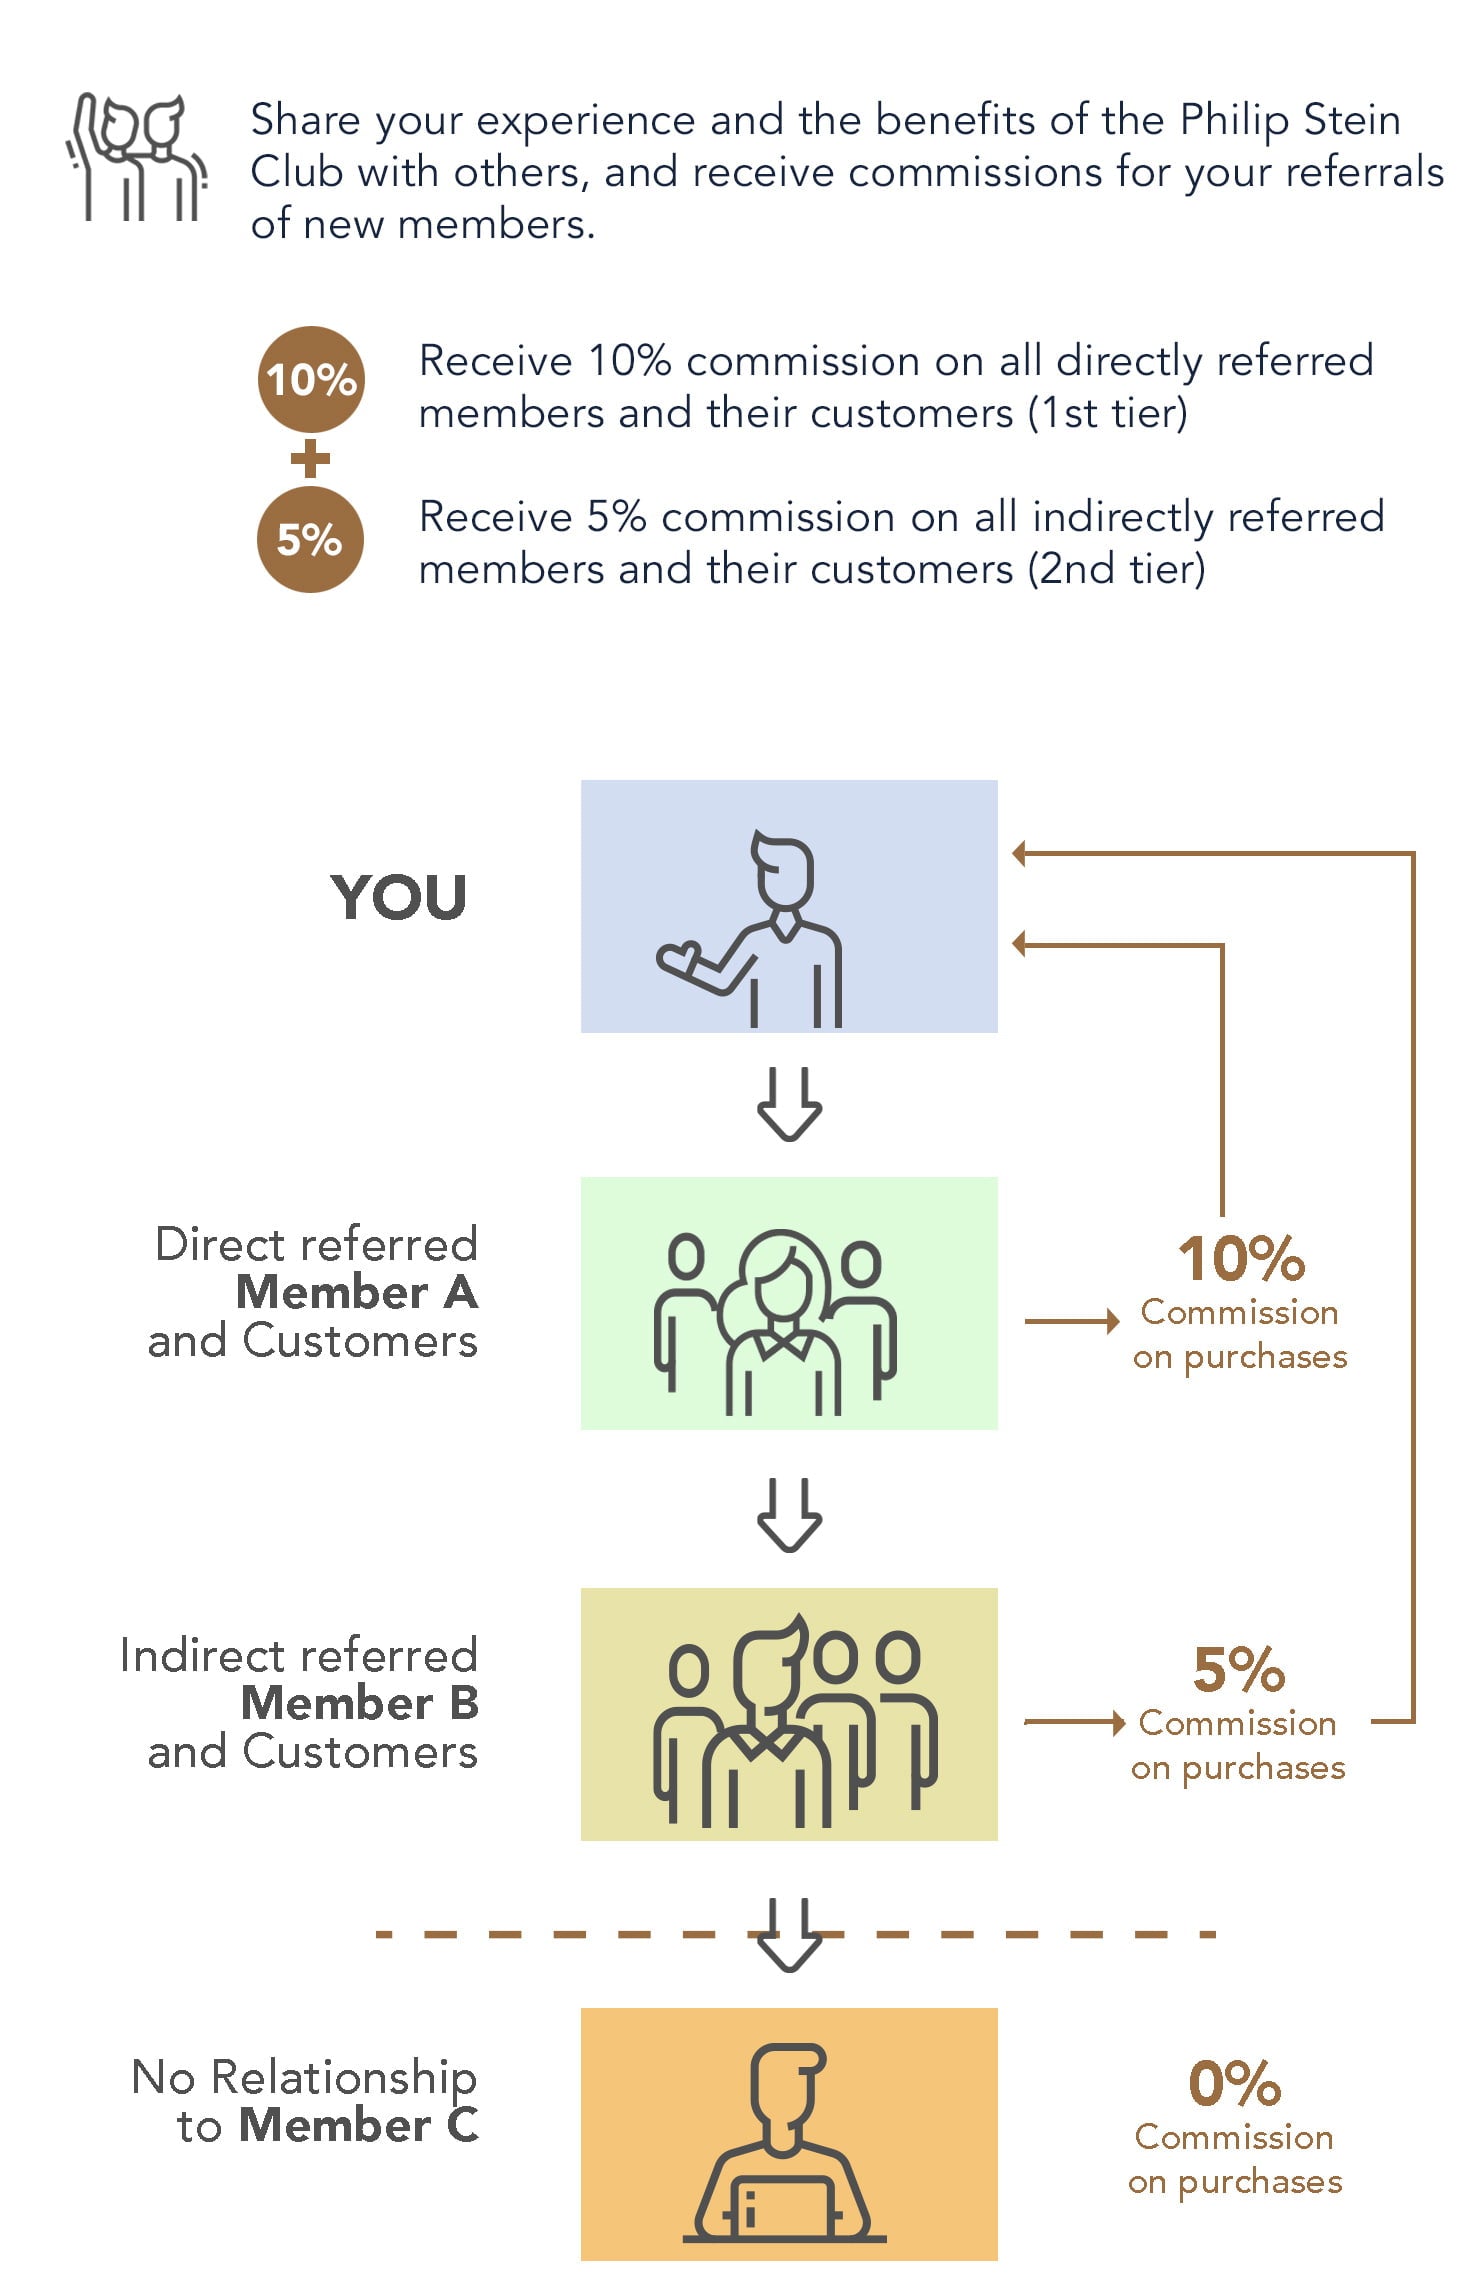 The Referral Program to Potential Members